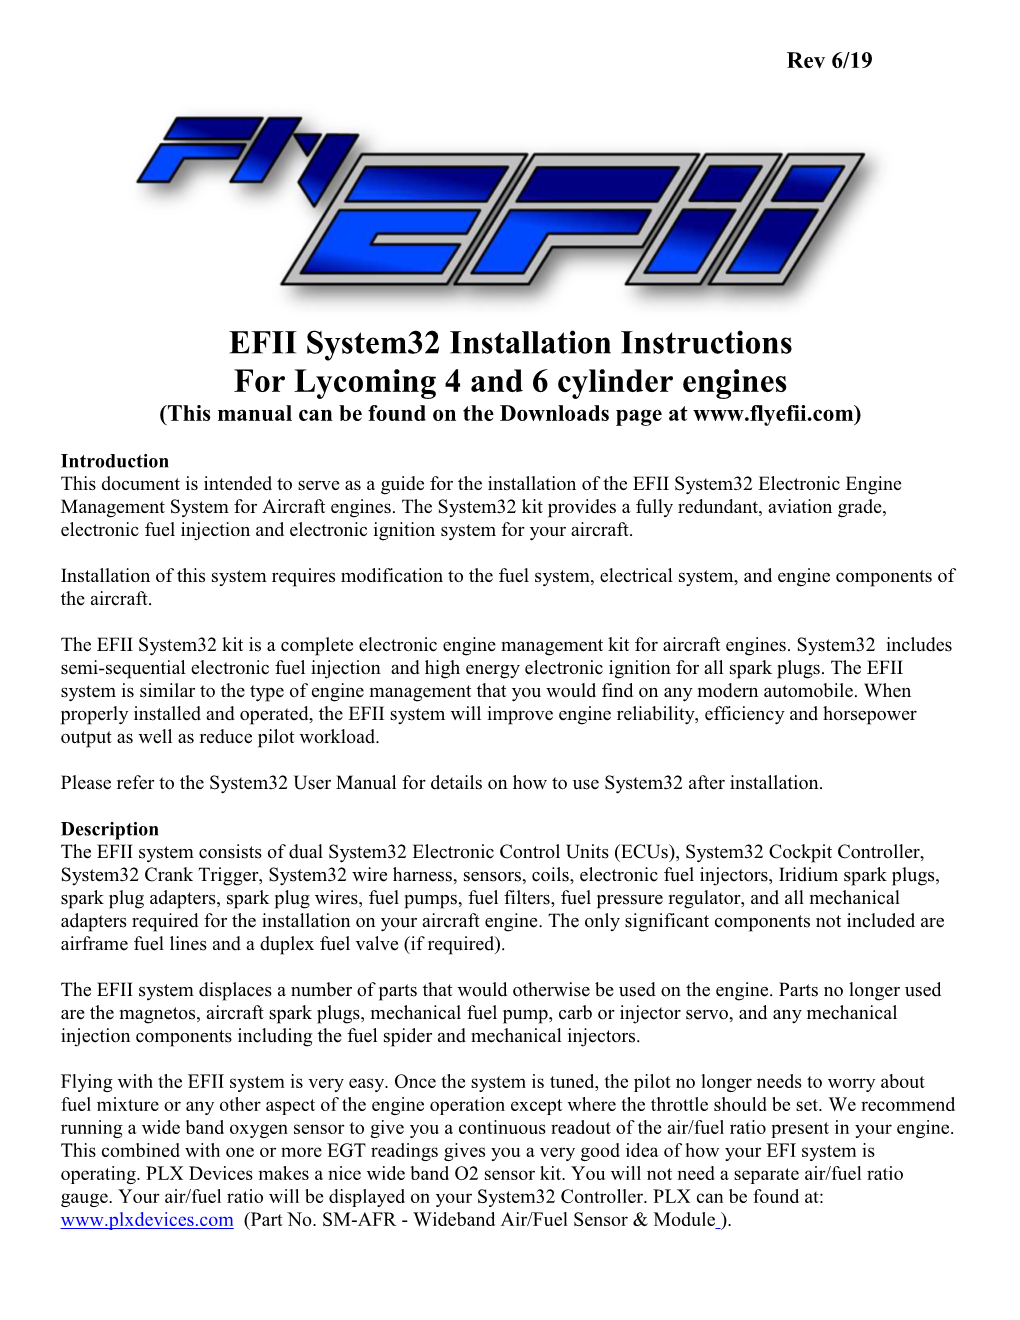 EFII System32 Installation Instructions for Lycoming 4 and 6 Cylinder Engines (This Manual Can Be Found on the Downloads Page At